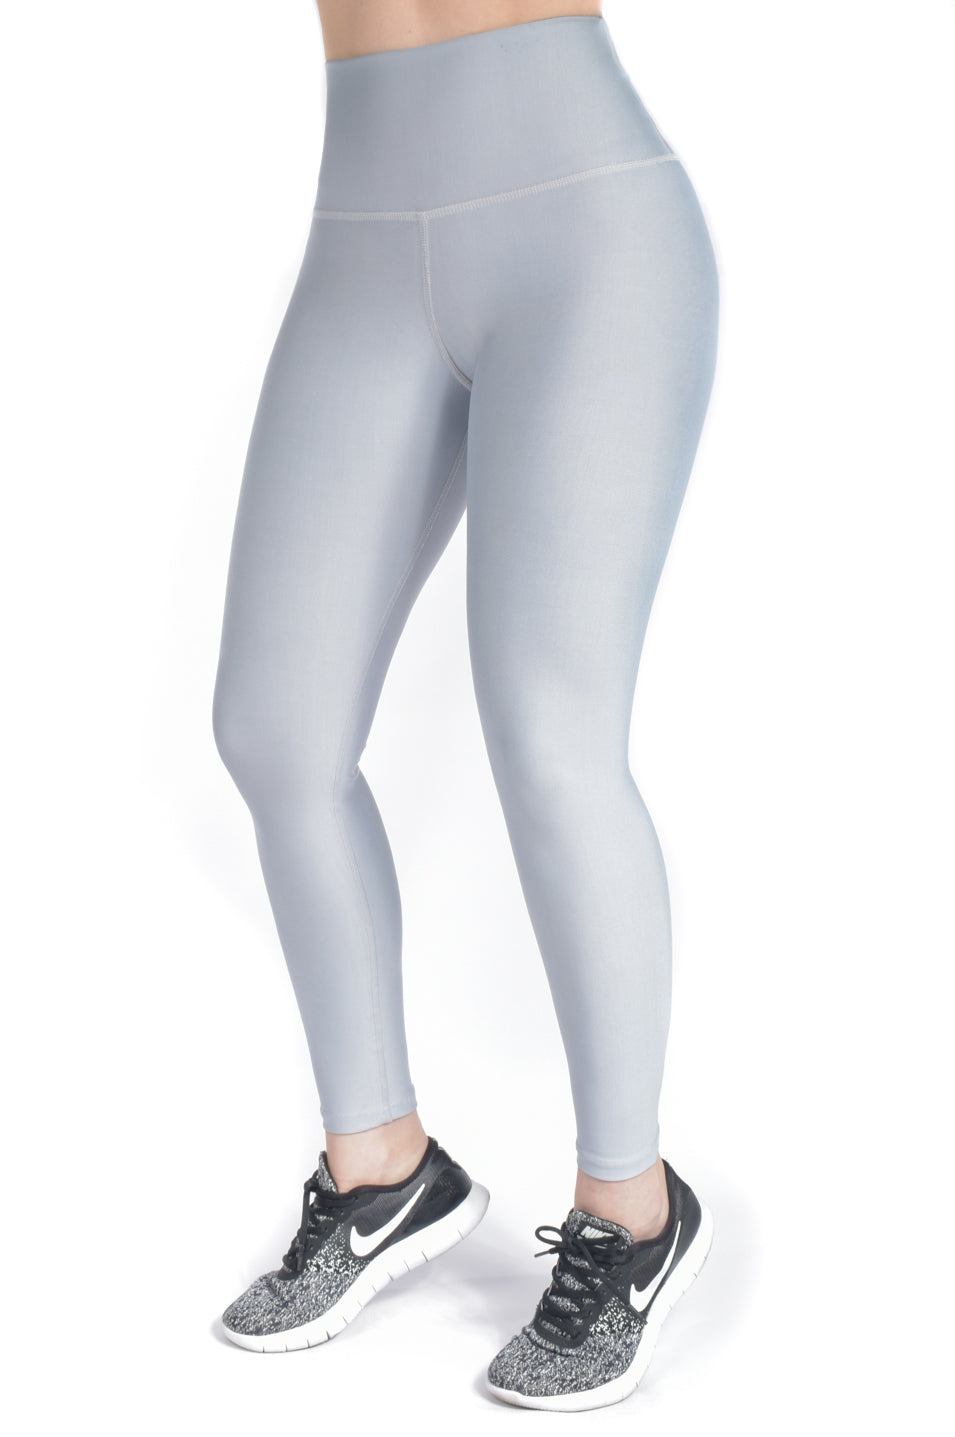 Comprar Leggings Colombianos Bless Me online